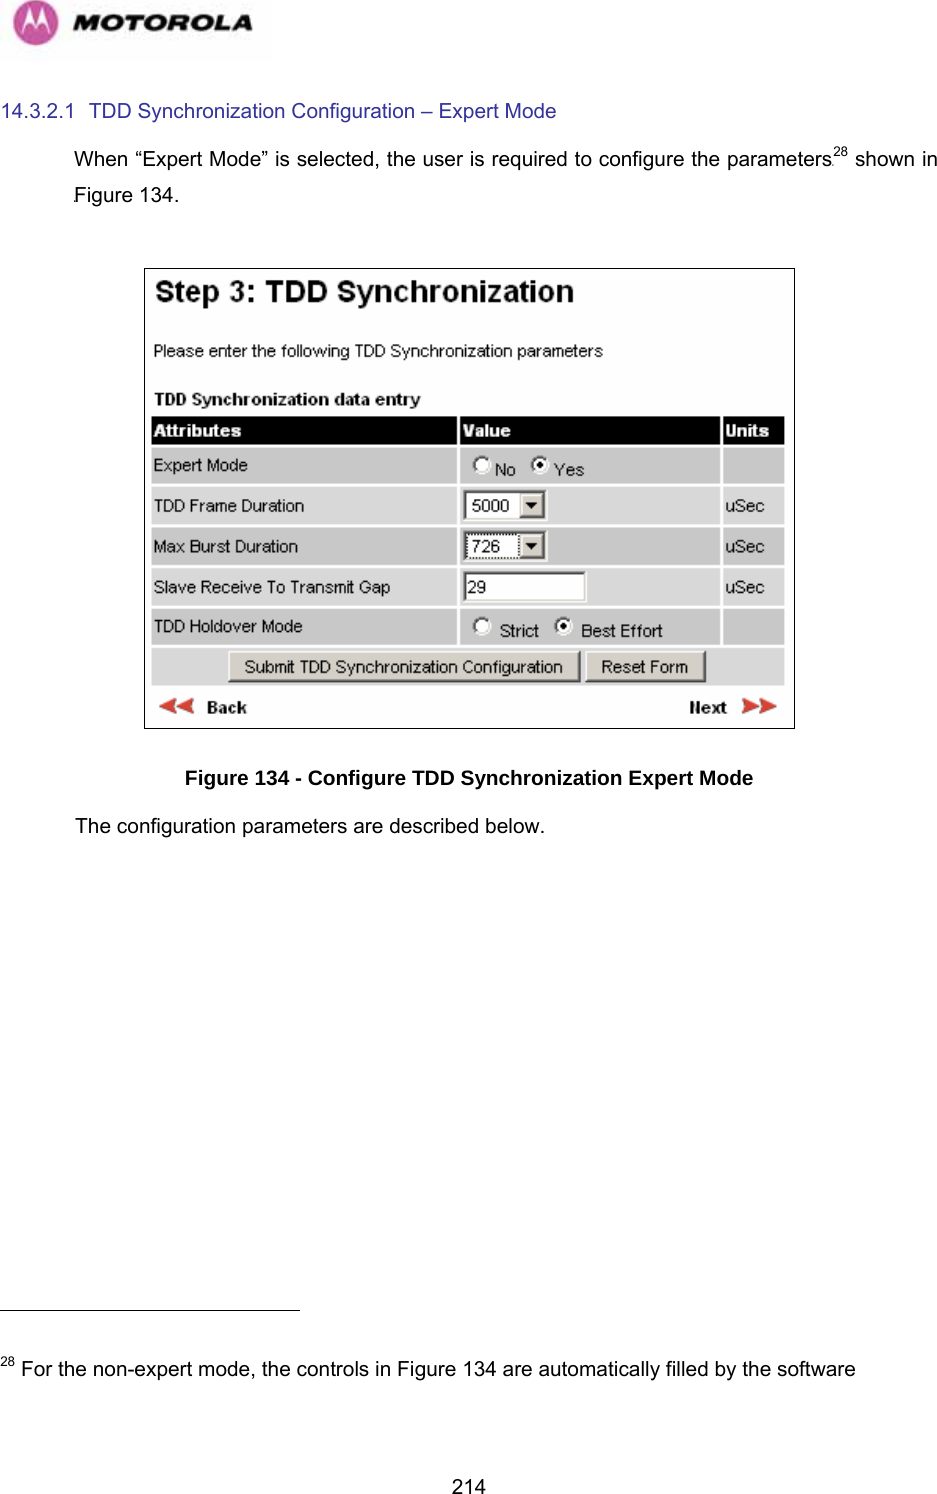   21414.3.2.1 TDD Synchronization Configuration – Expert Mode When “Expert Mode” is selected, the user is required to configure the parameters27F28 shown in 1228HFigure 134.    Figure 134 - Configure TDD Synchronization Expert Mode The configuration parameters are described below.                                                      28 For the non-expert mode, the controls in Figure 134 are automatically filled by the software 